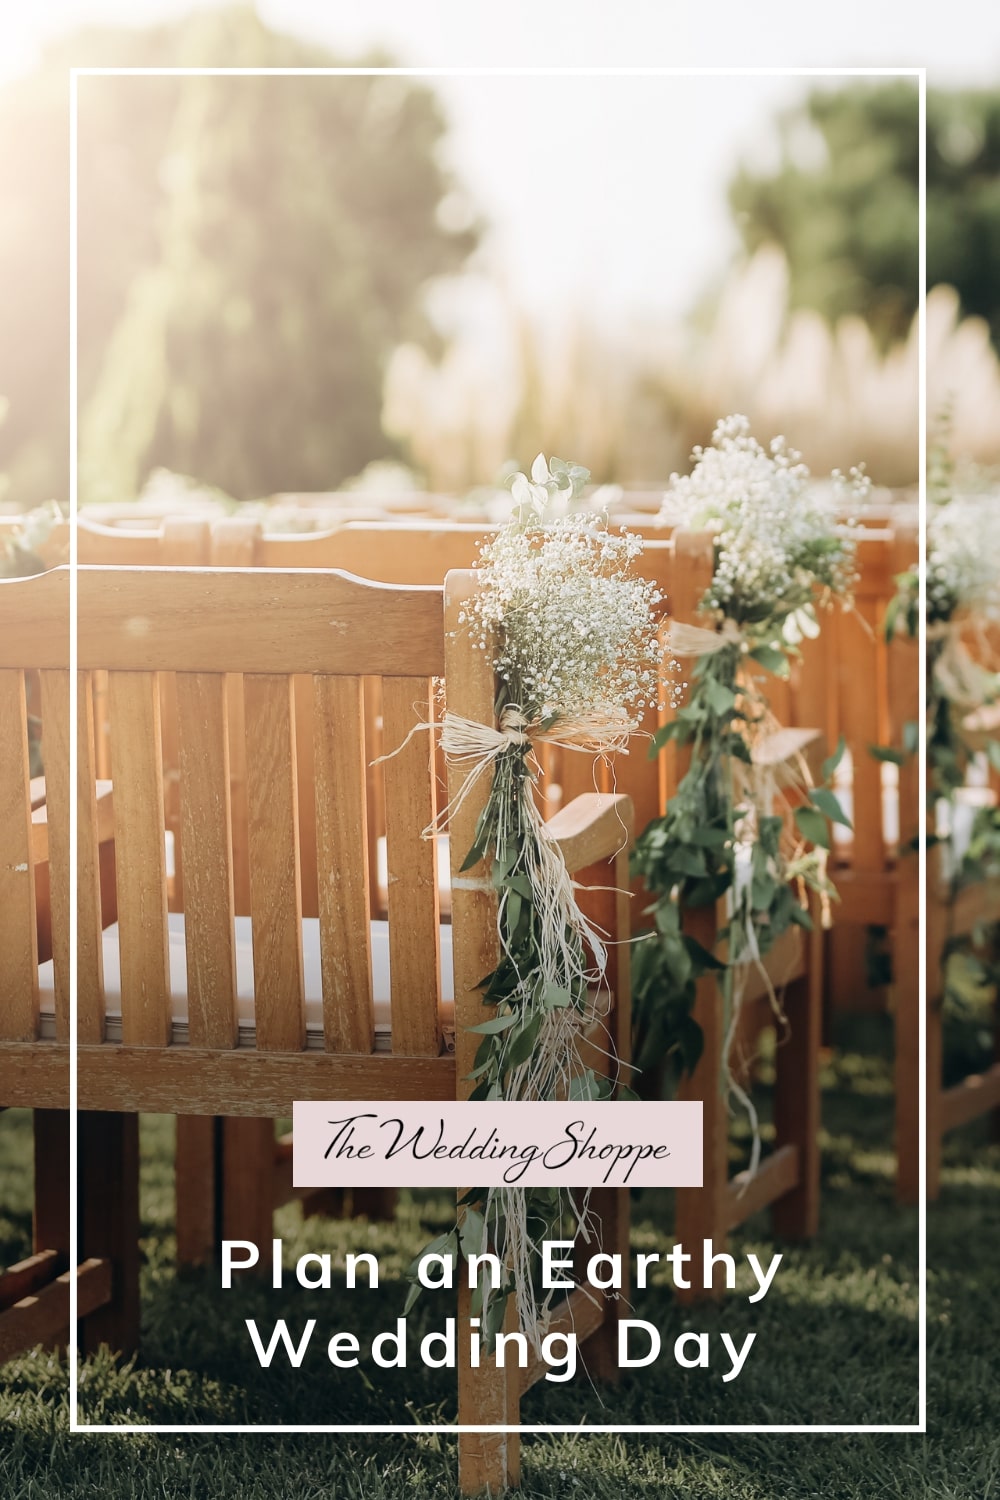 Pinnable graphic for "Plan an Earthy Wedding Day" from the Wedding Shoppe